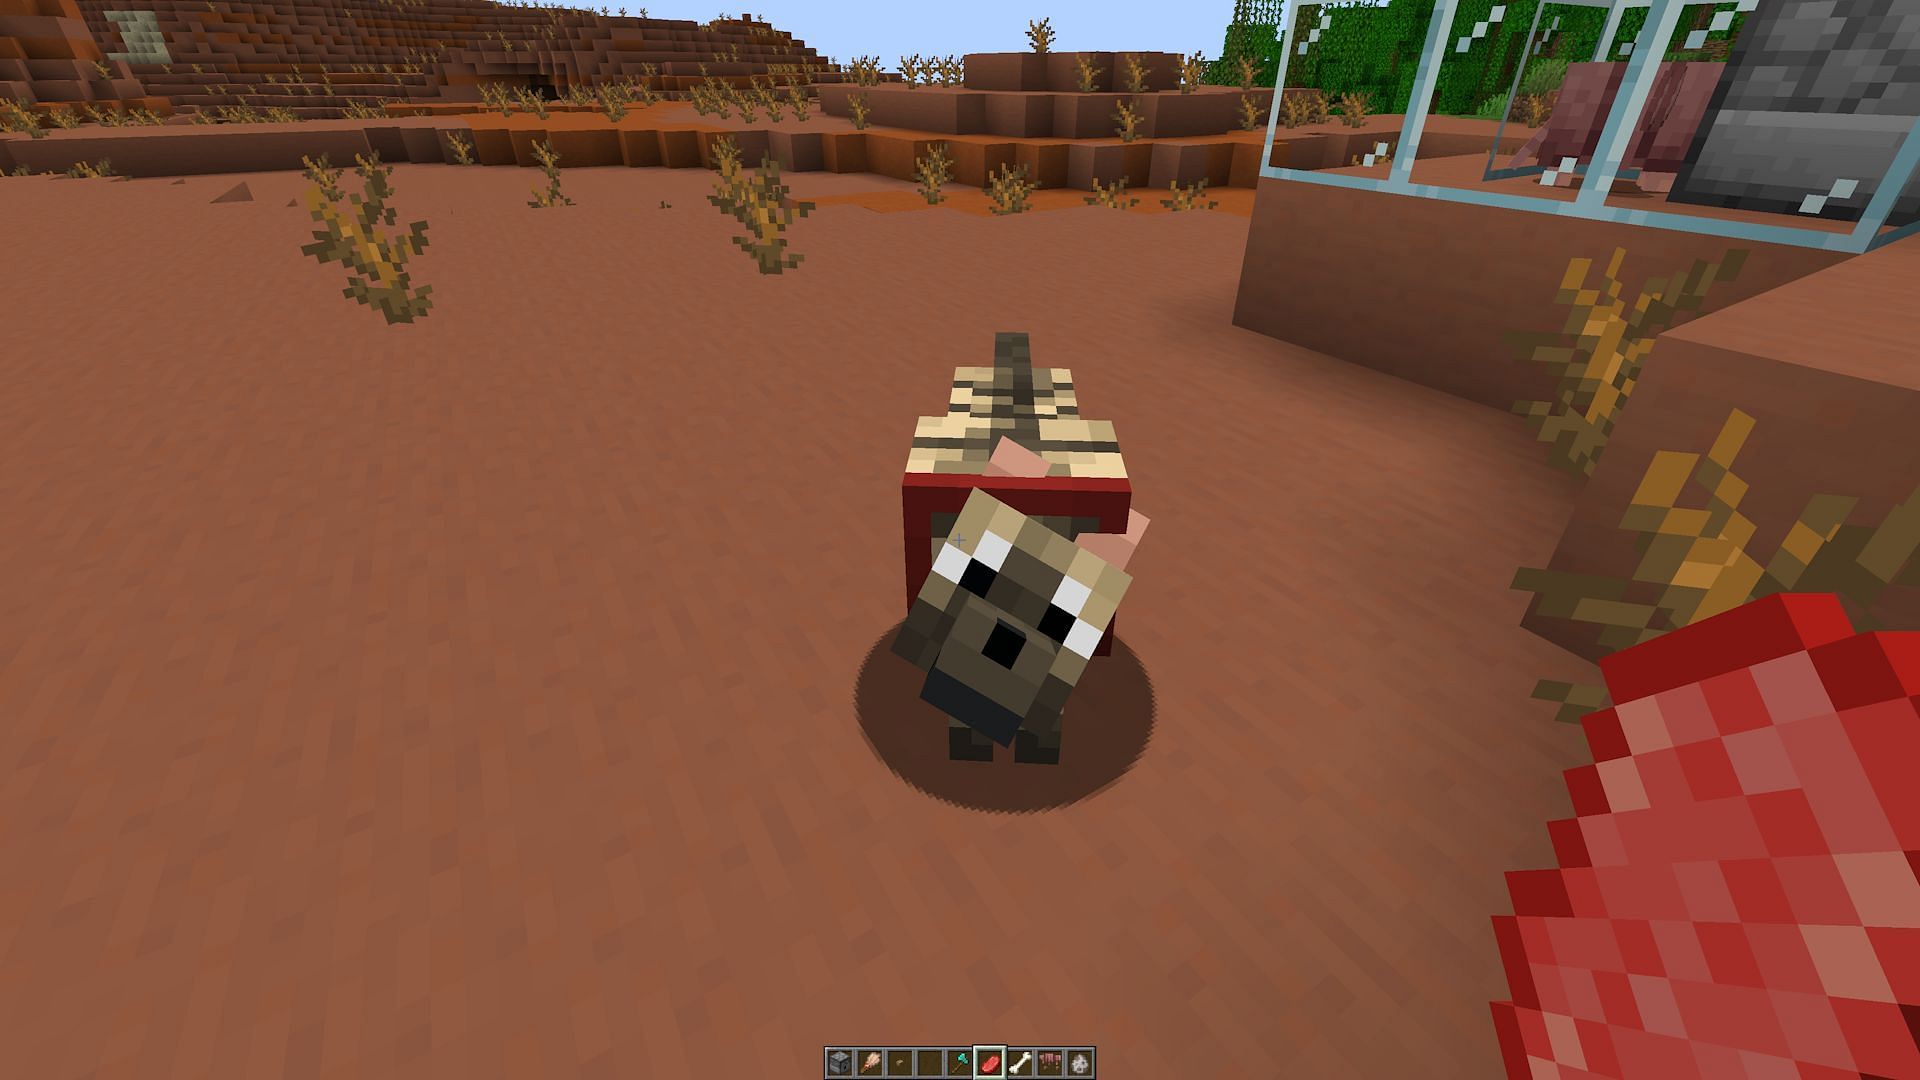 Wolves will take much less food to keep healthy due to 1.20.80 (Image via Mojang)